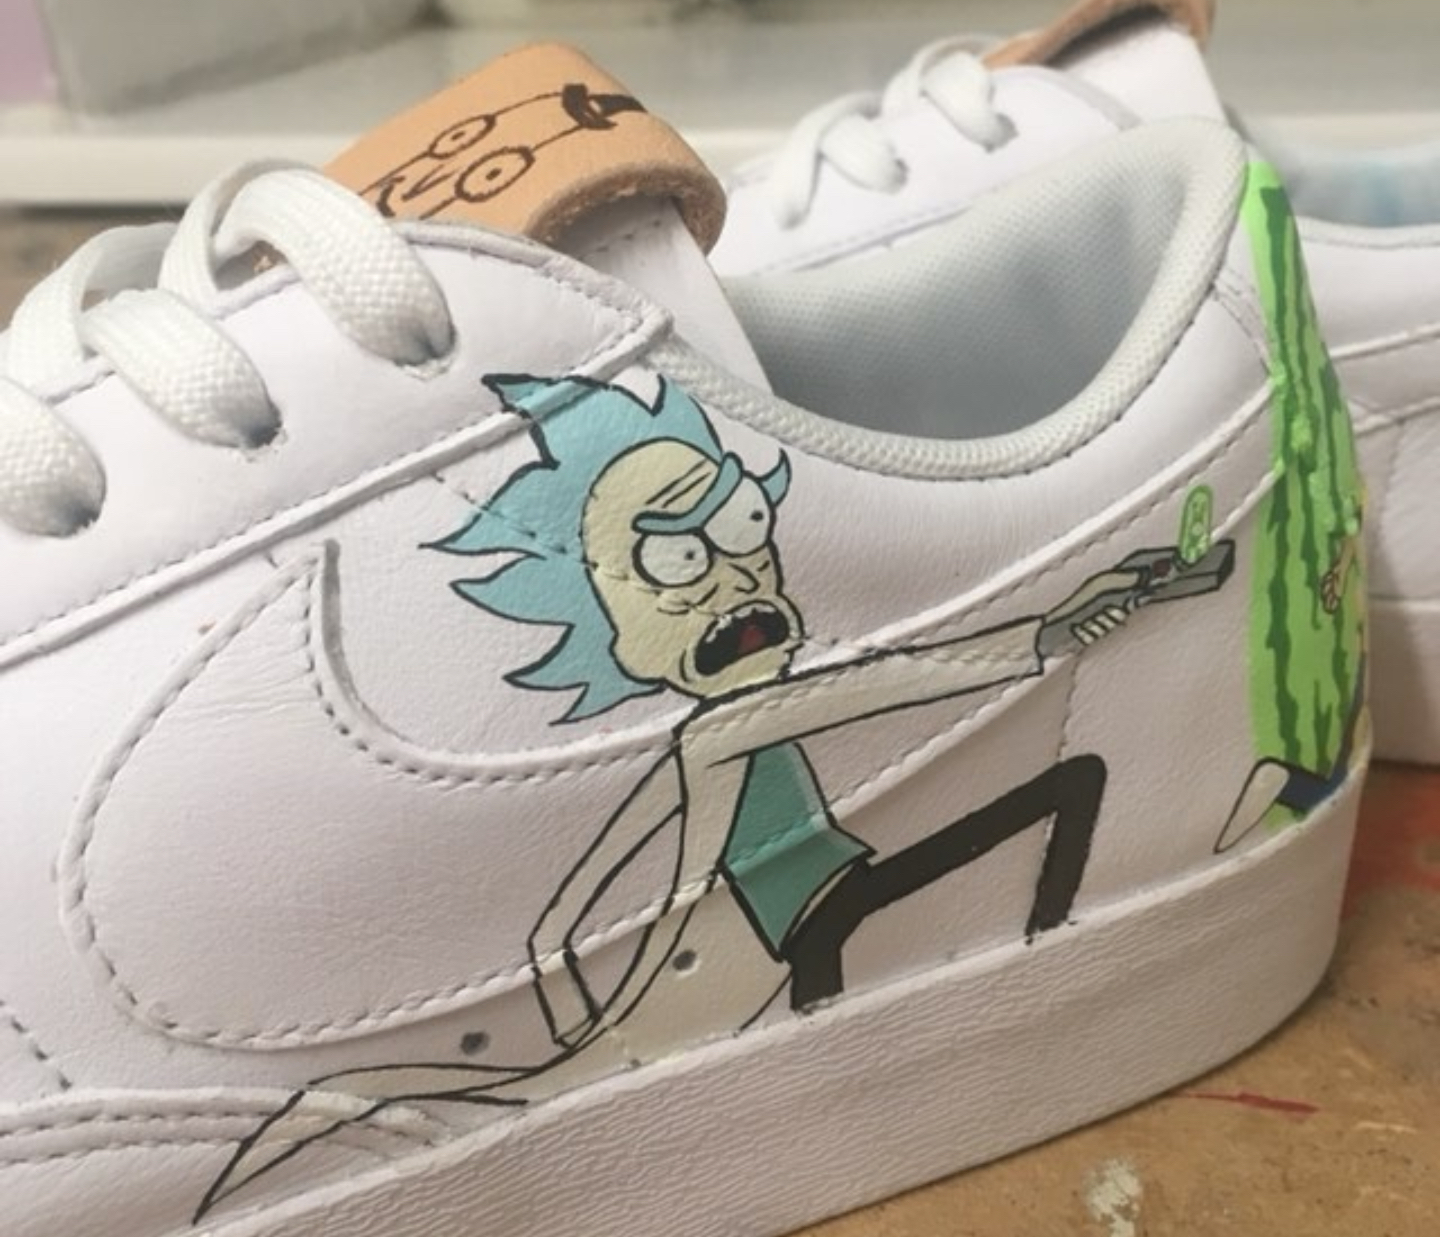 Rick And Morty Custom Shoes Air Force 1 Rick n morty